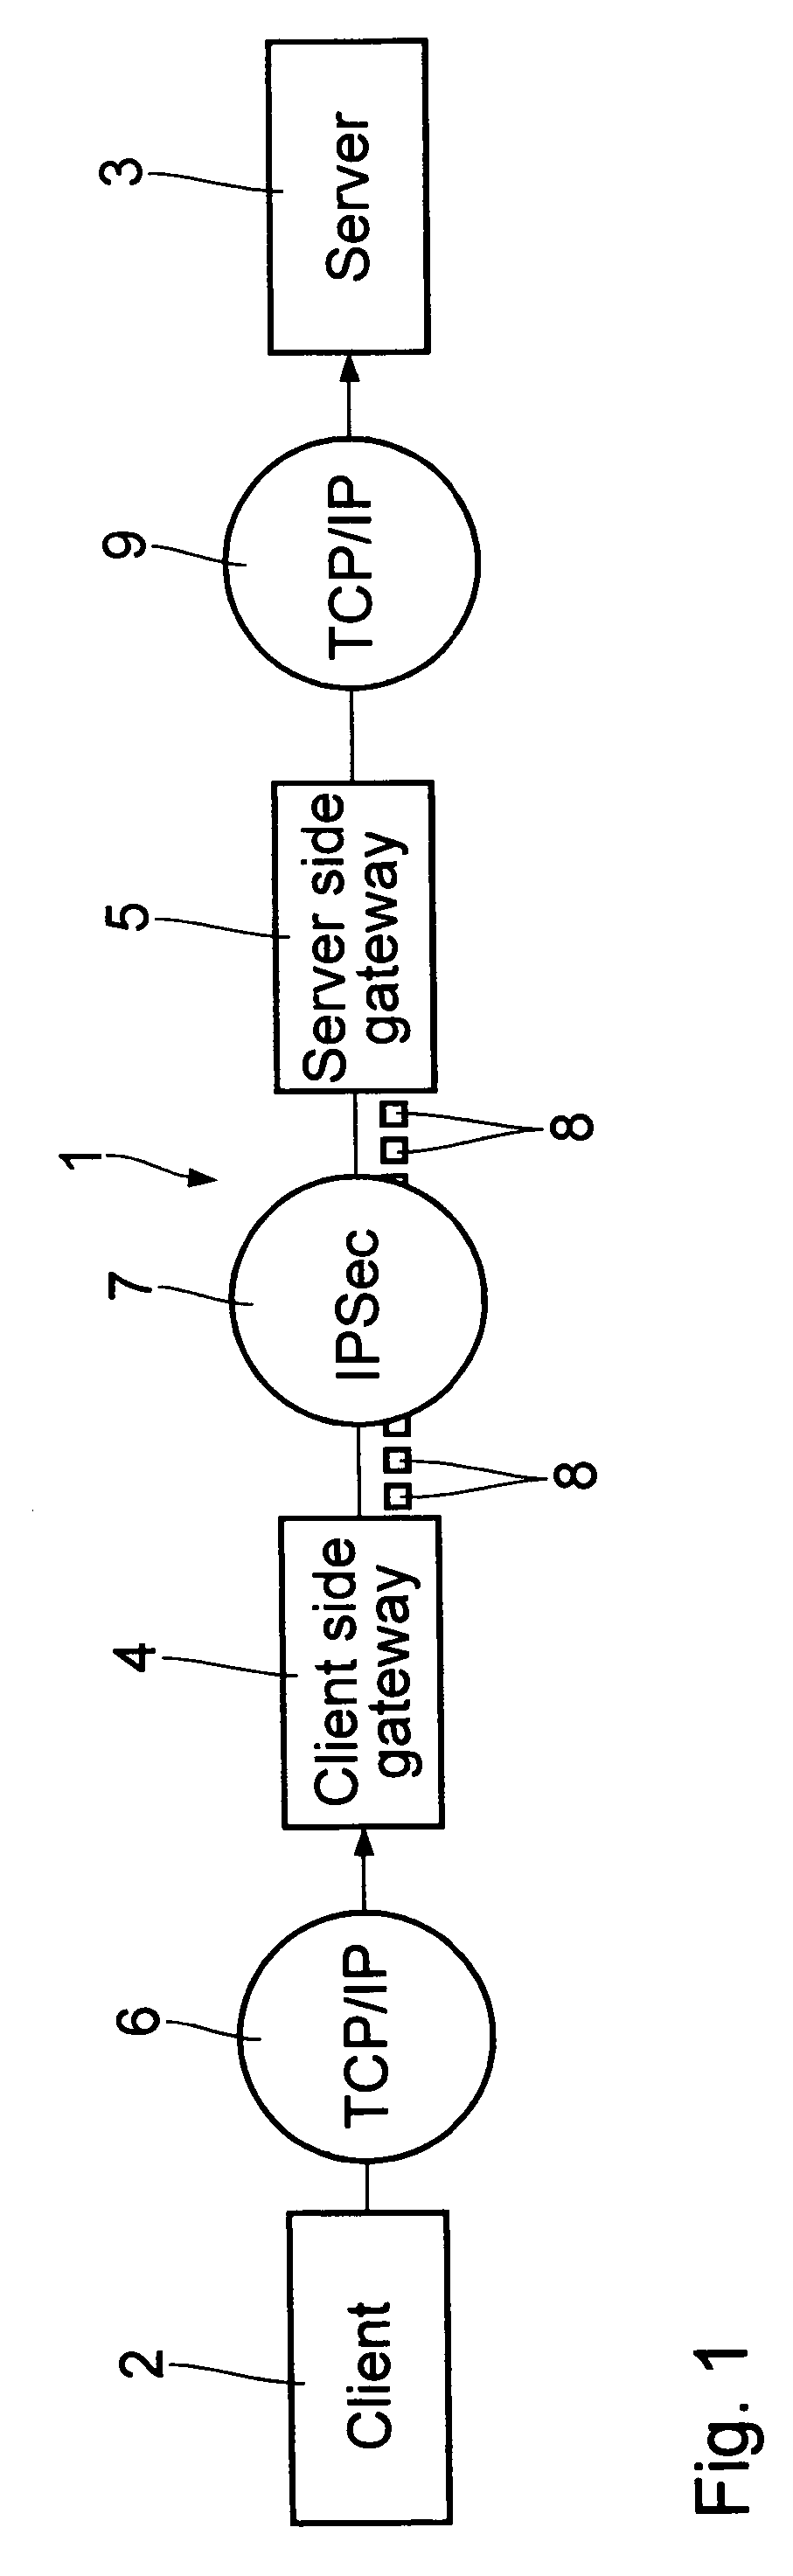 Method for transmitting a message by compressed data transmission between a sender and a receiver via a data network